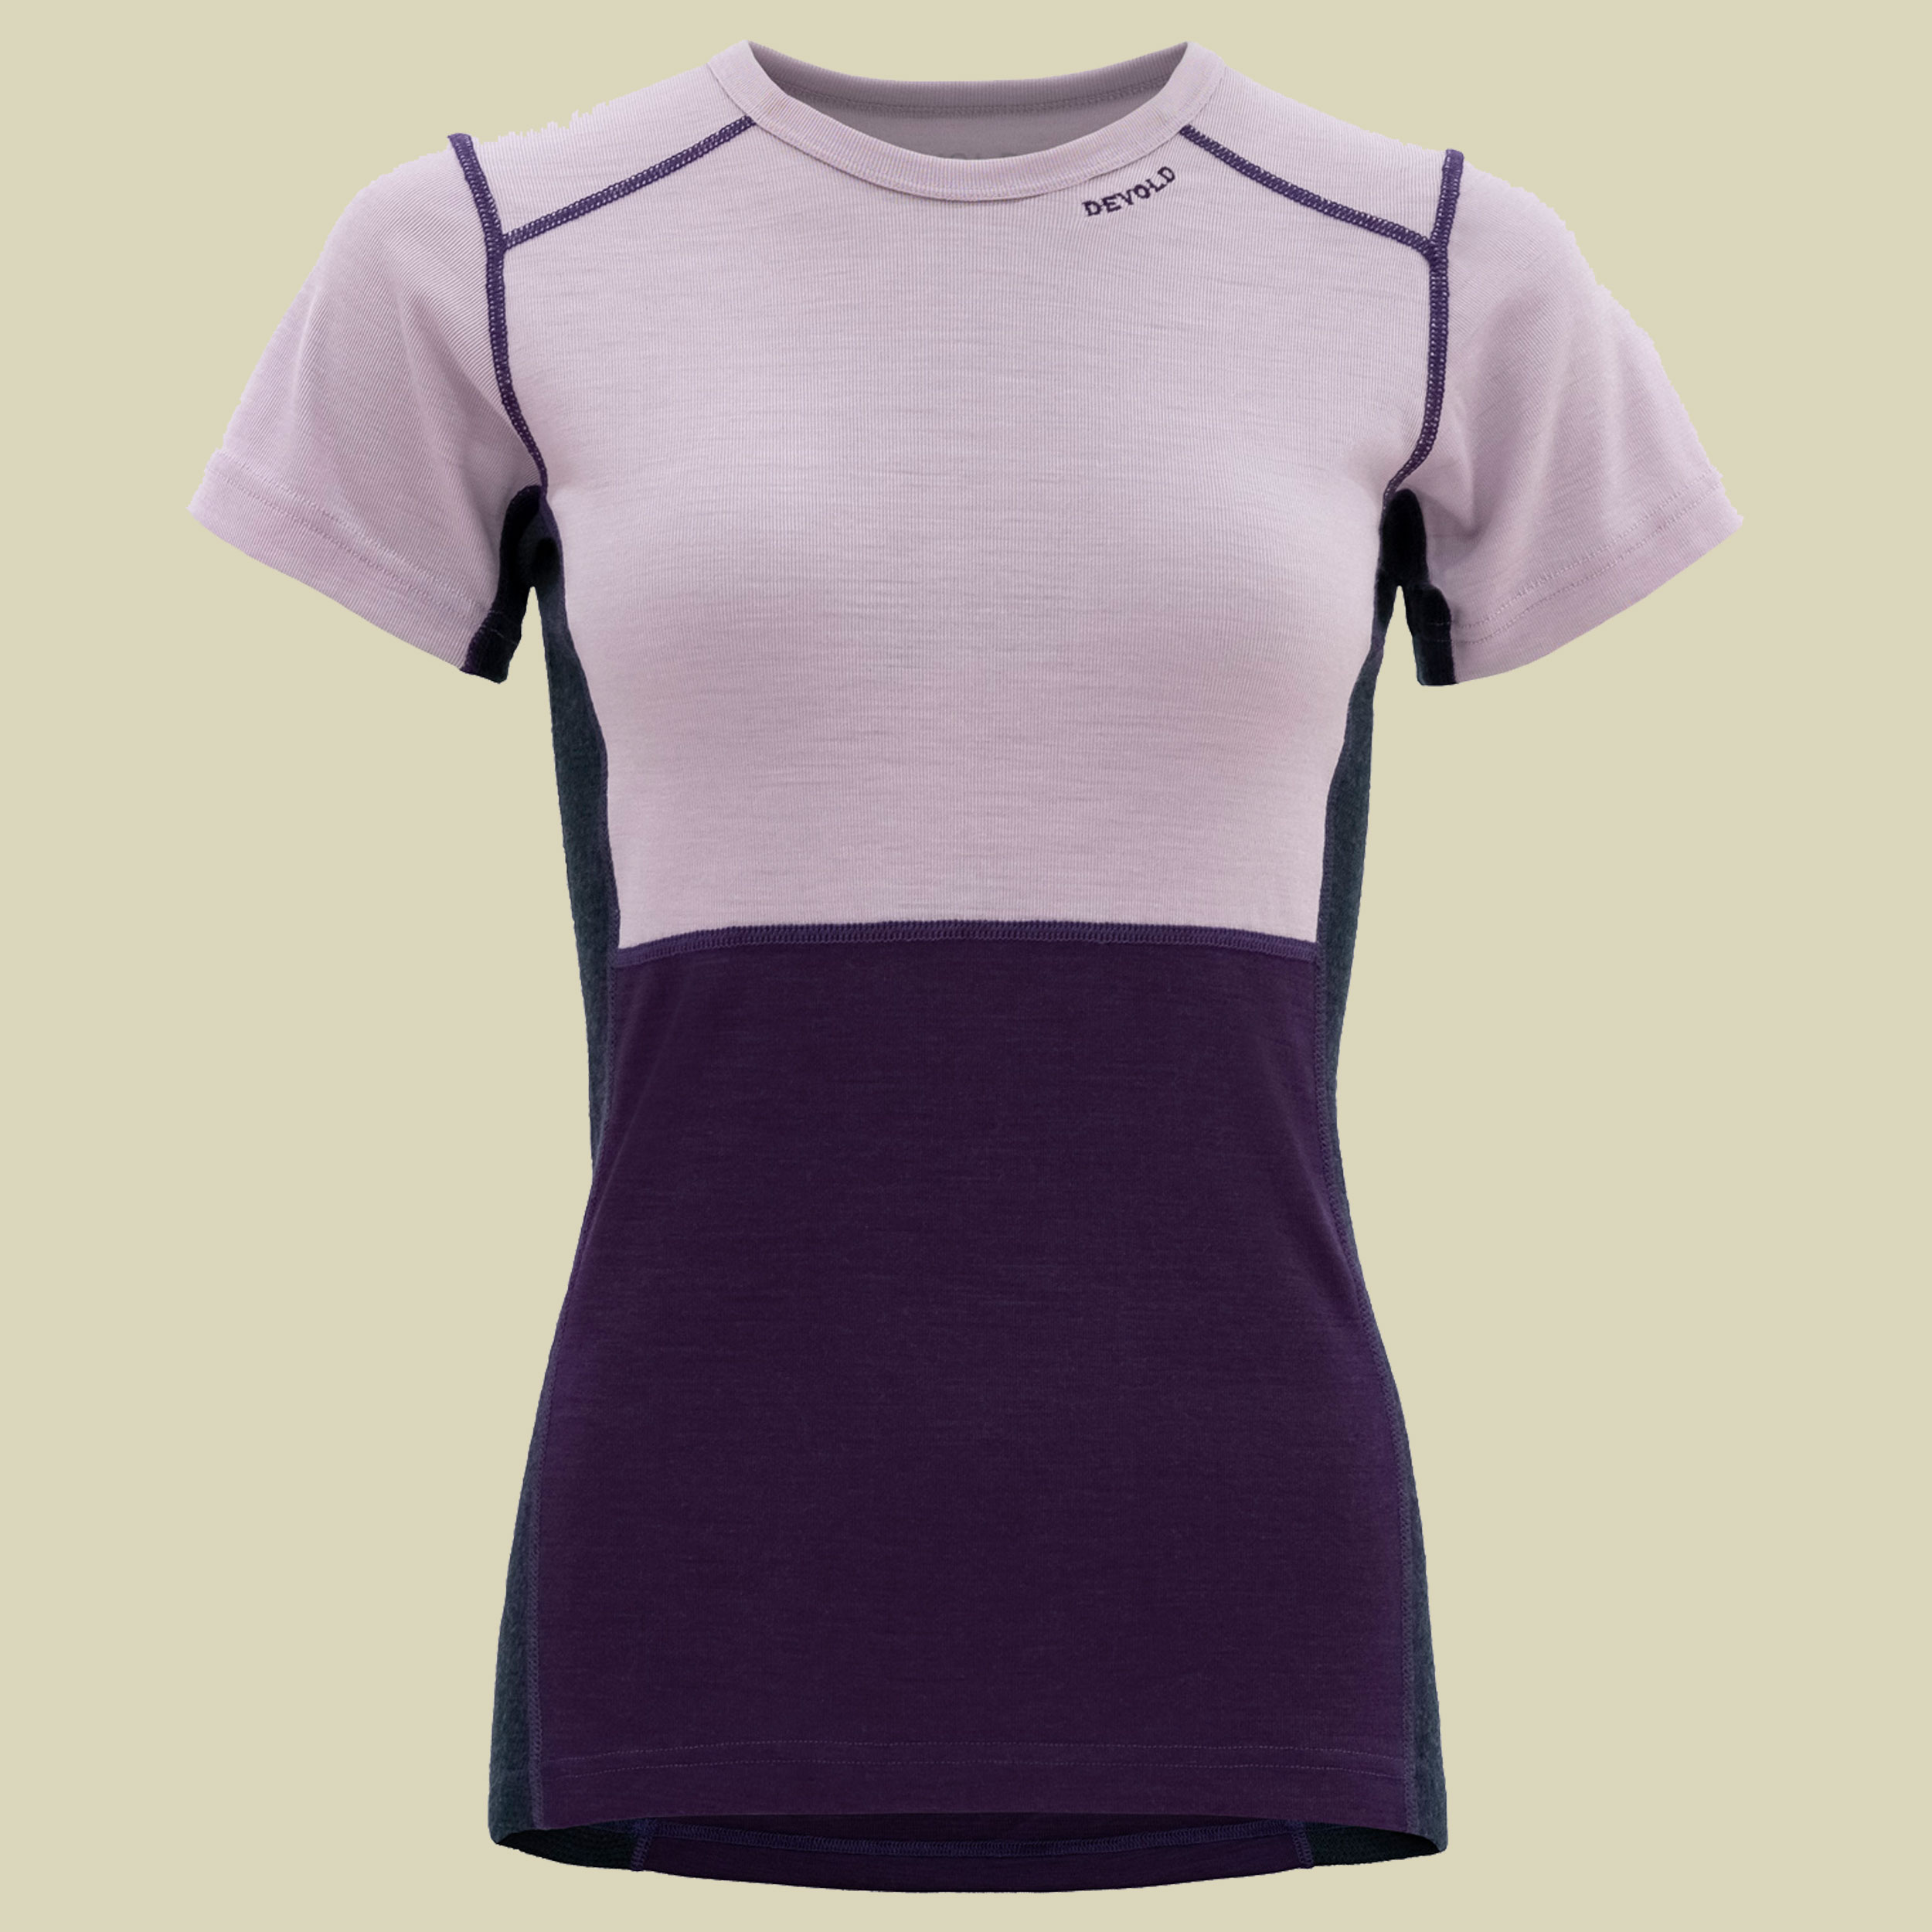 Lauparen Merino 190 T-Shirt Woman Größe S Farbe orchid/lilac/ink